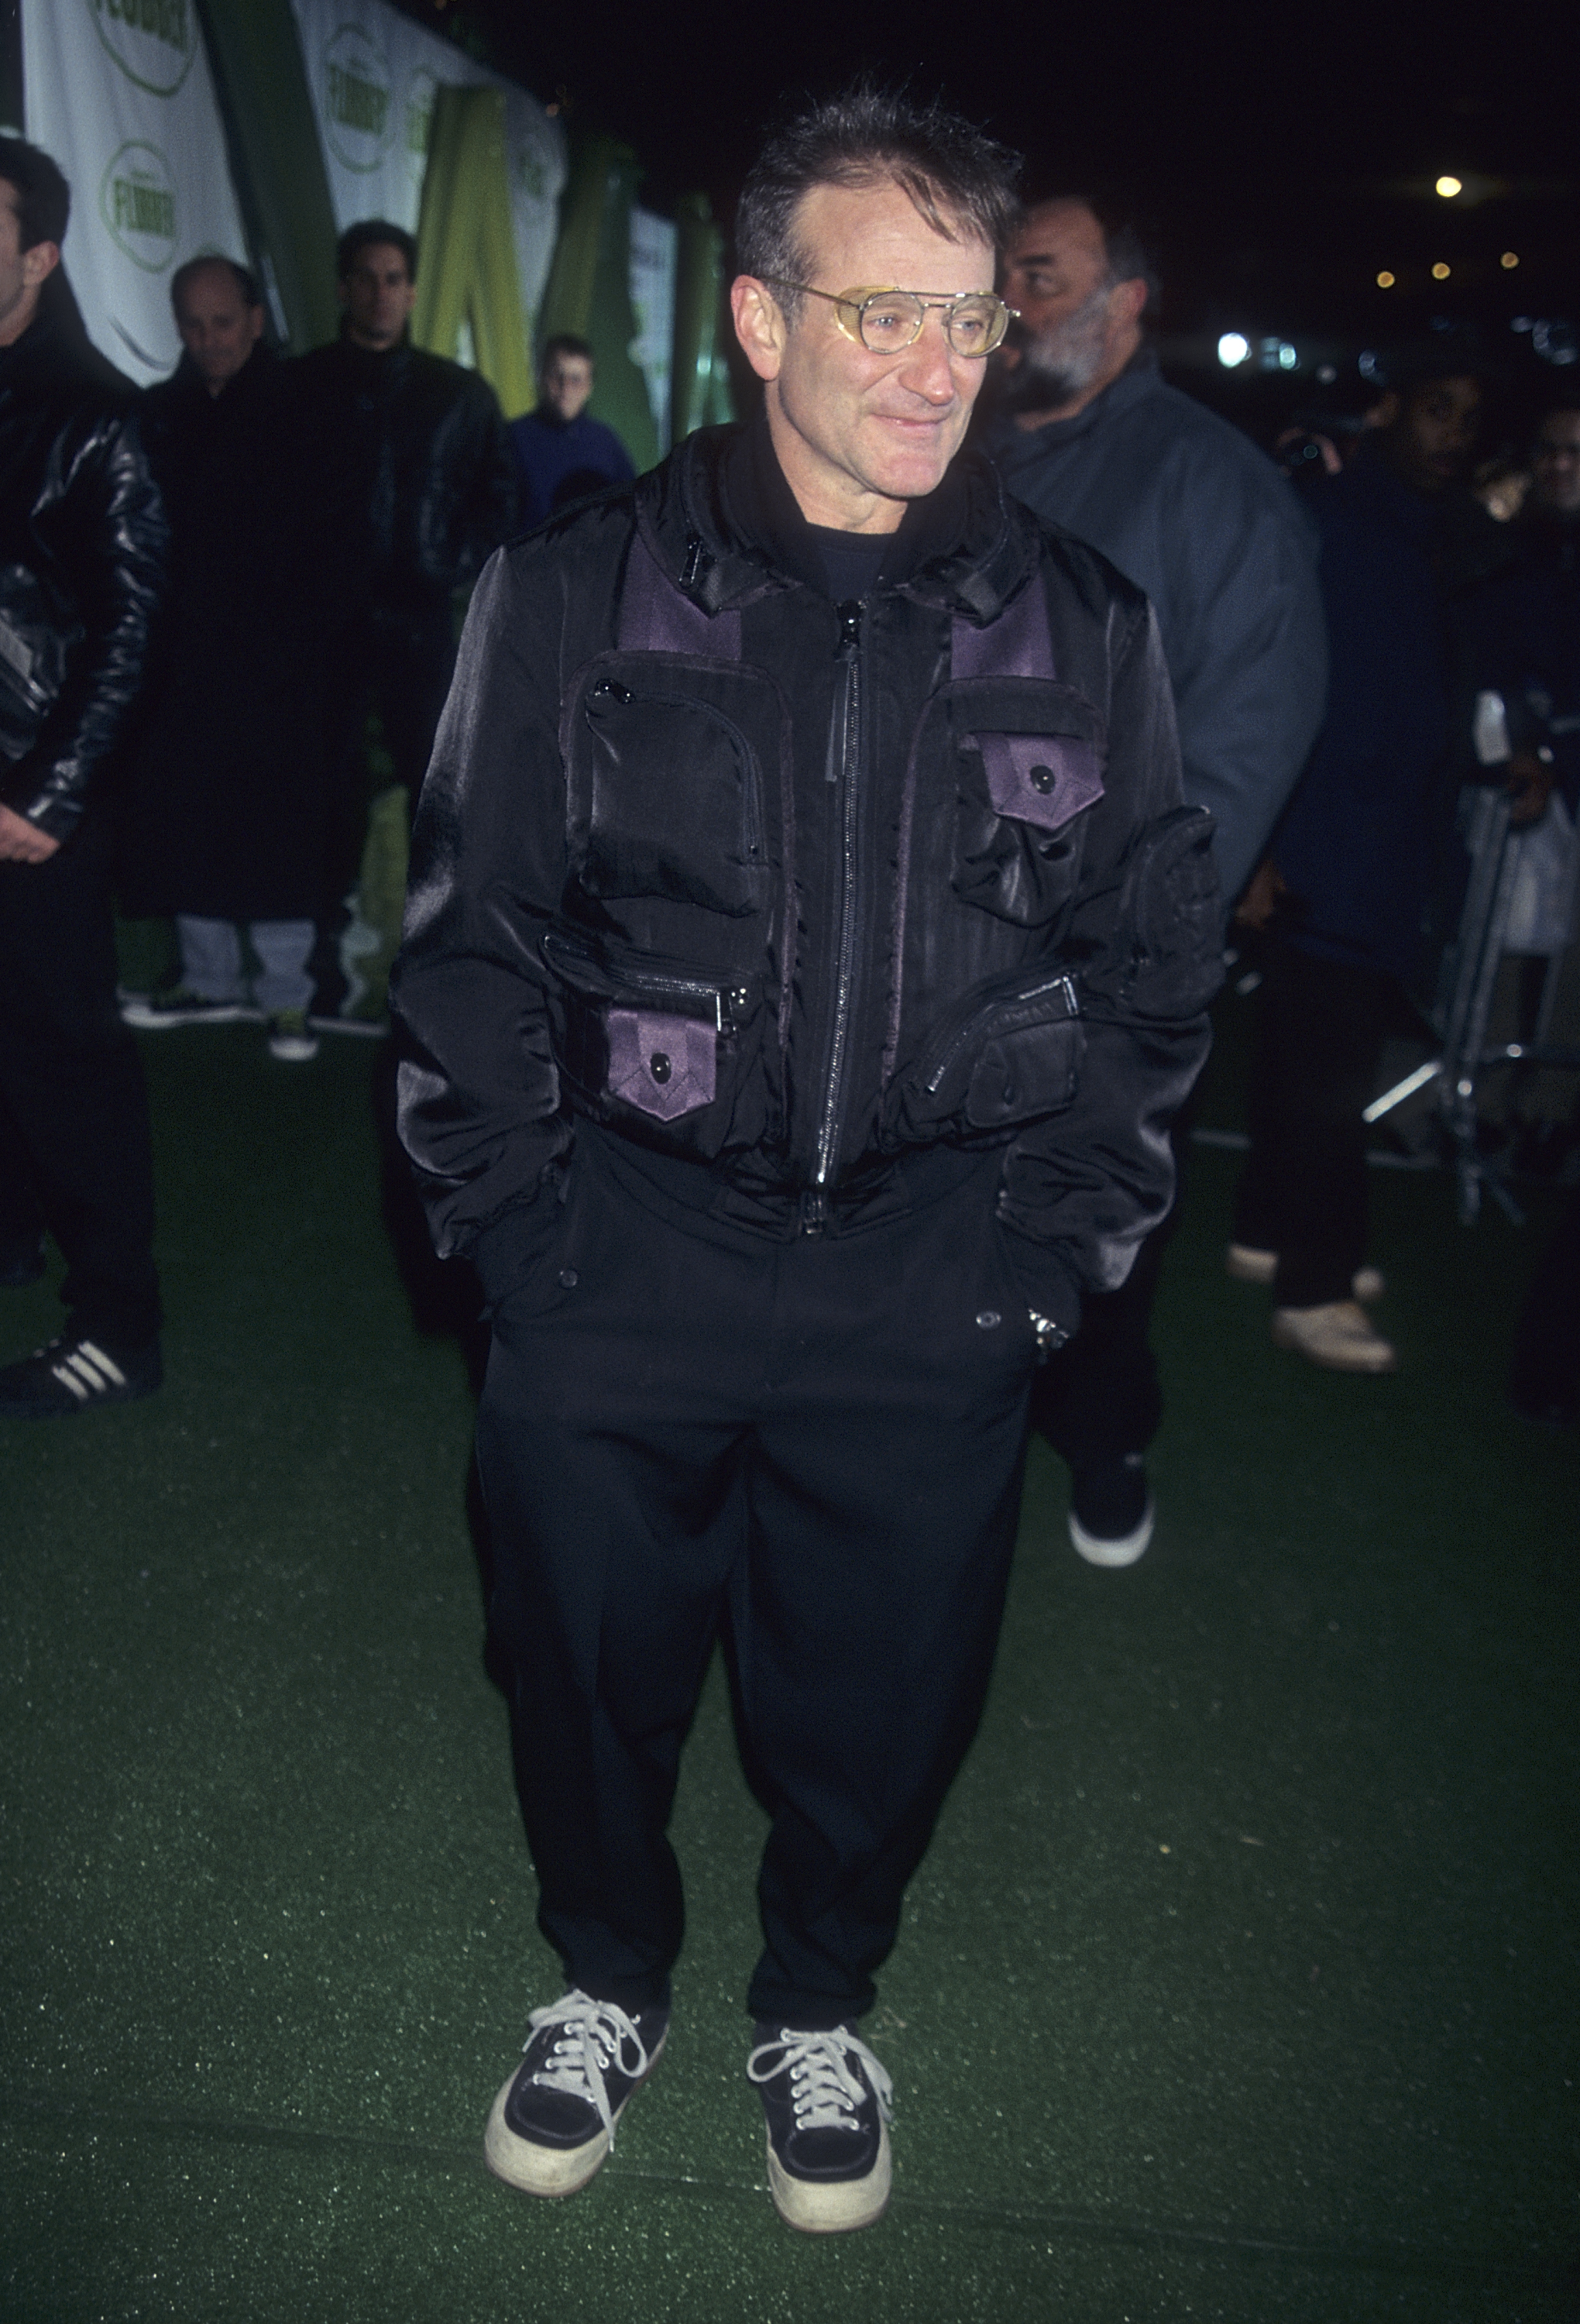 Robin Williams wore Issei Miyake to the premiere of Flubber in 1997.